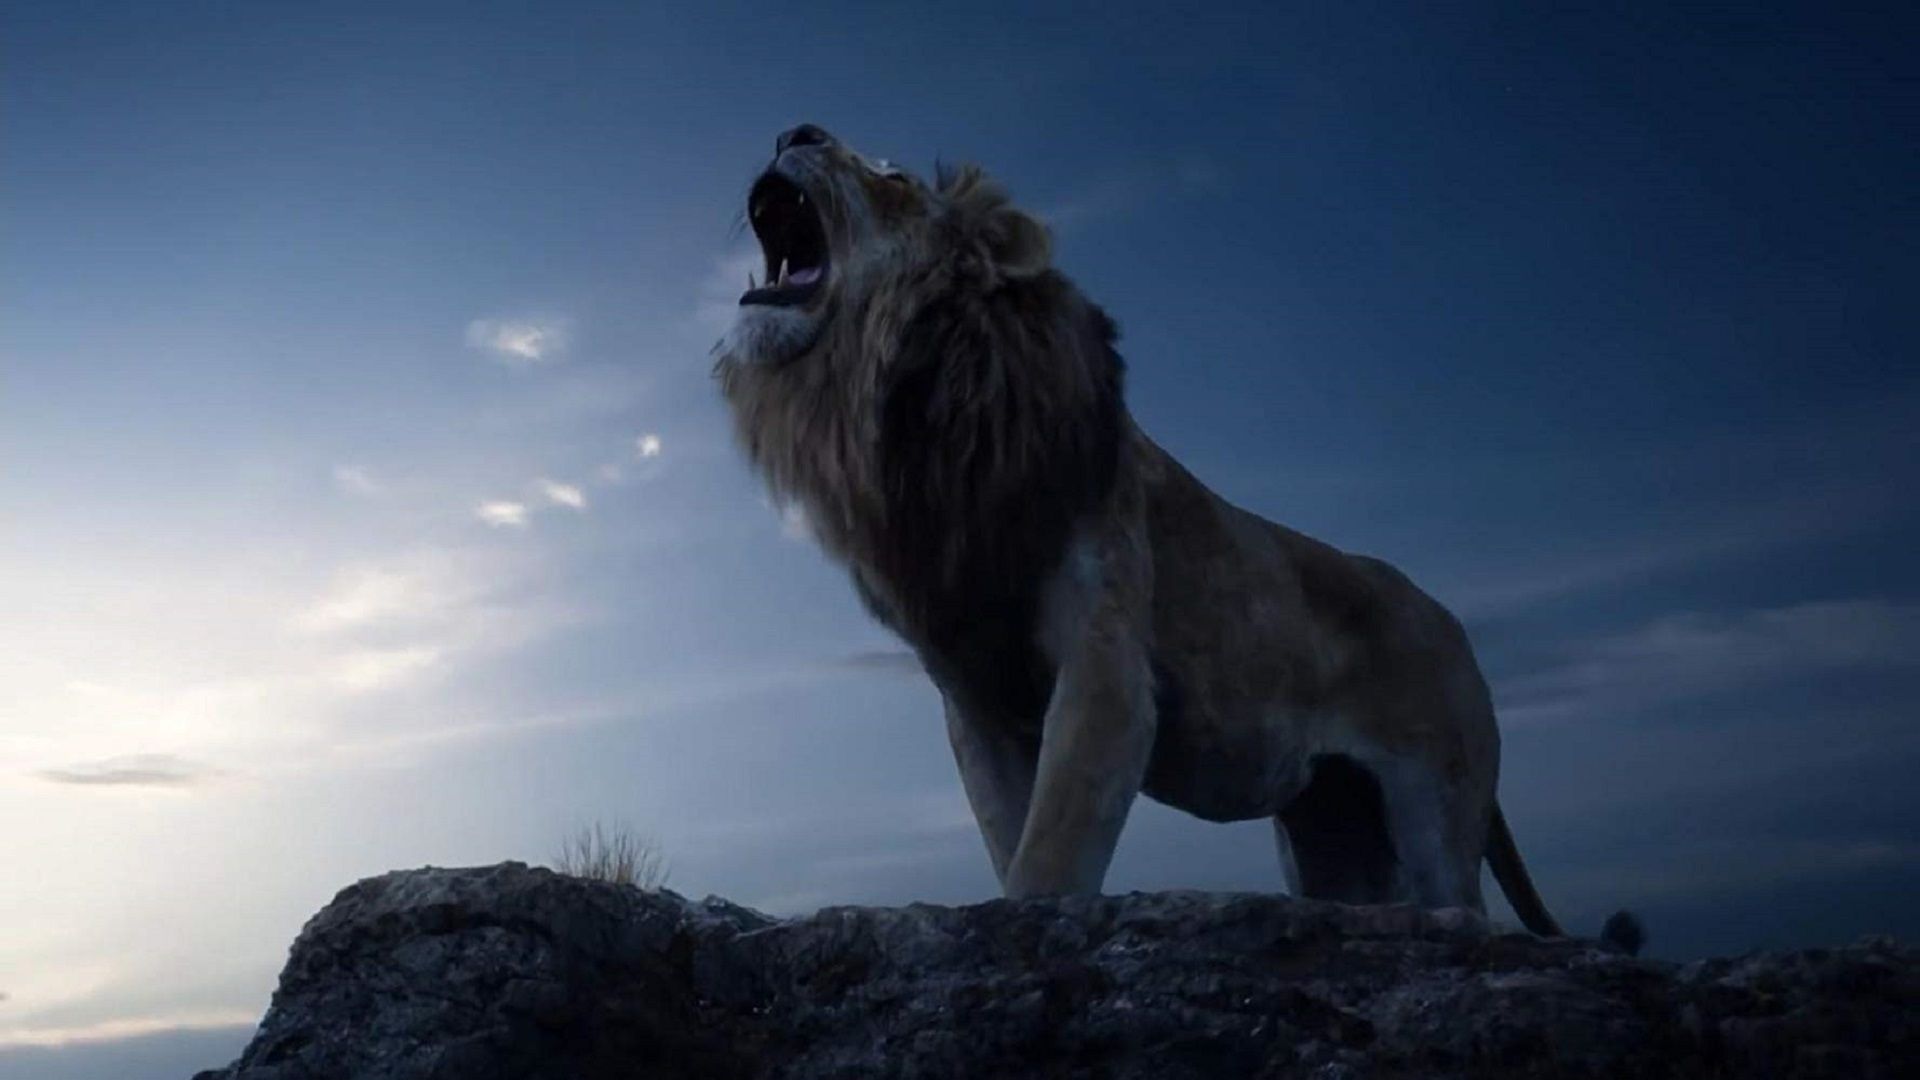 HD Lion King Wallpapers High Quality 